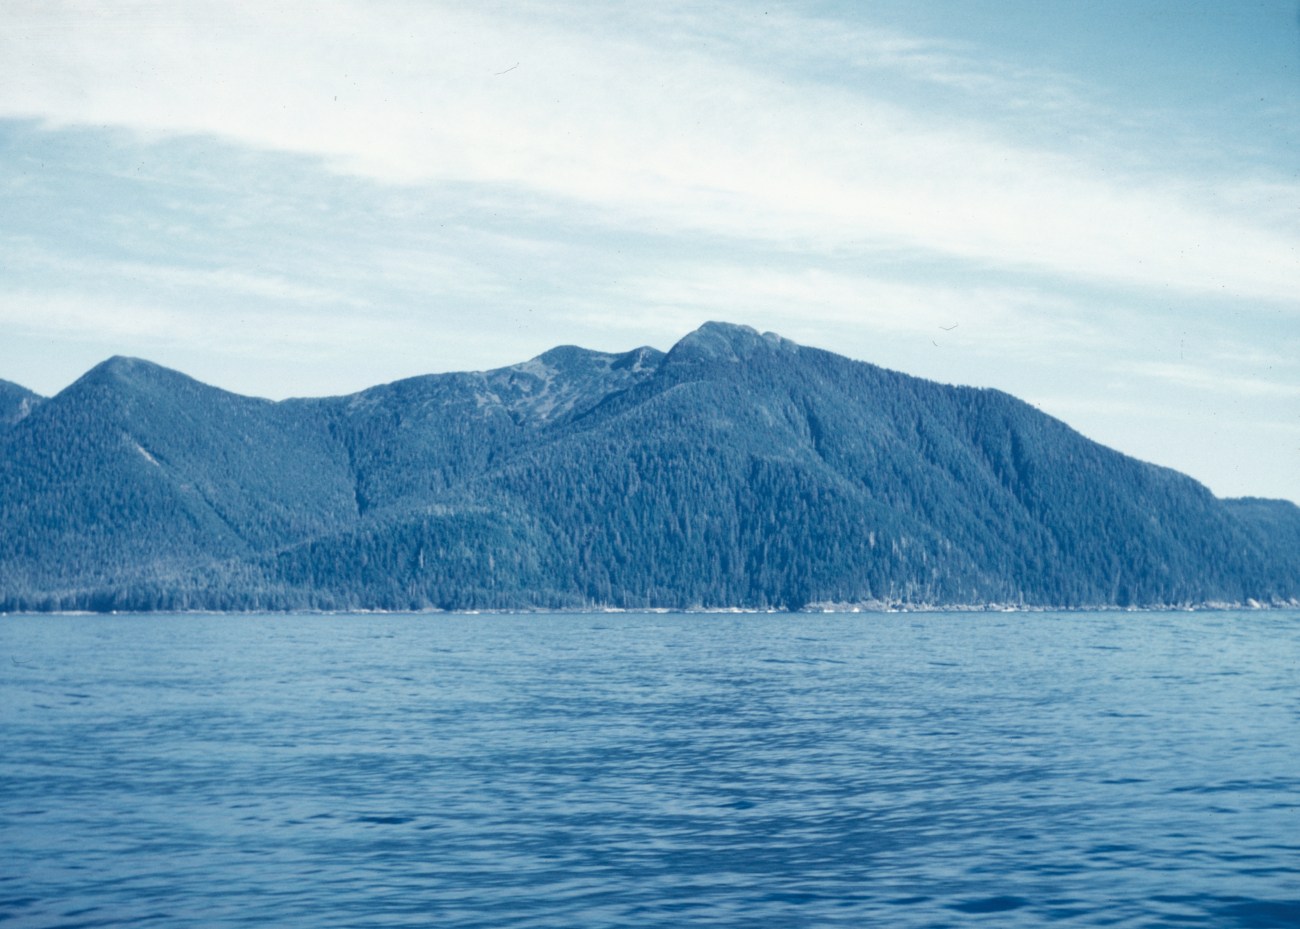 A view along the Inside Passage